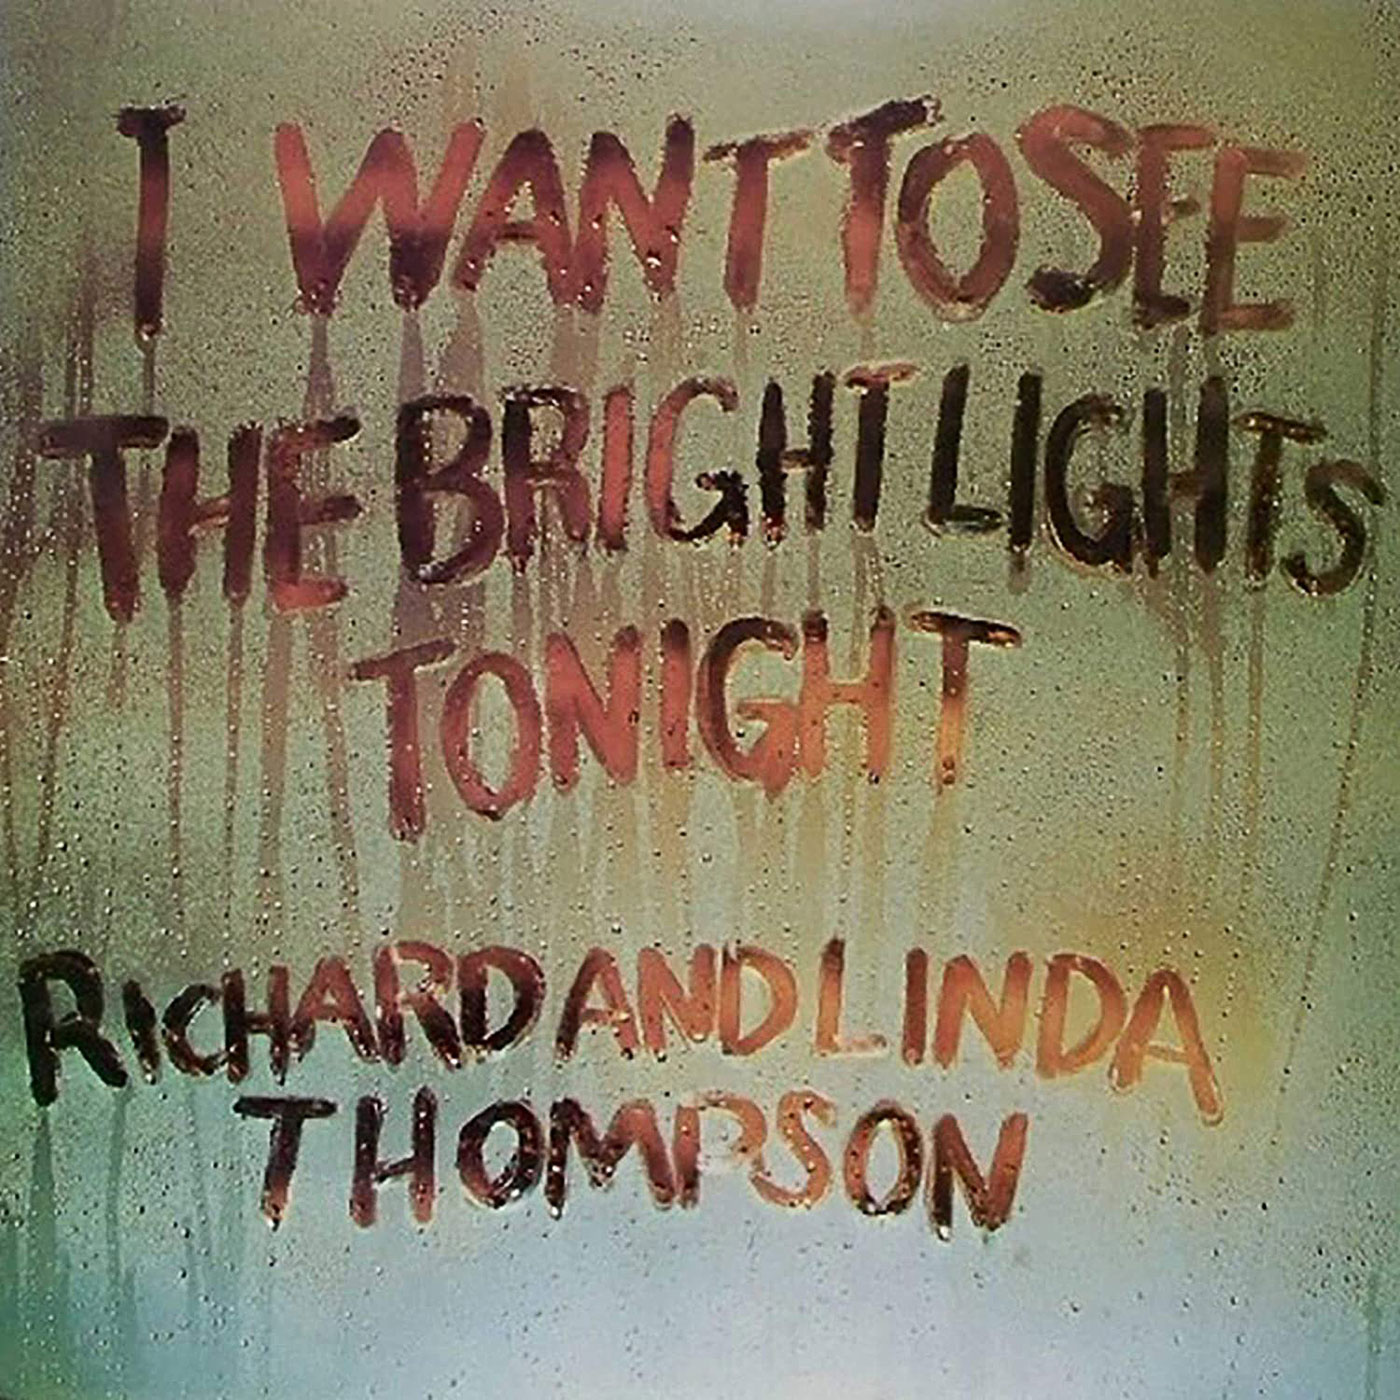 315 Richard and Linda Thompson – I Want to See the Bright Lights Tonight